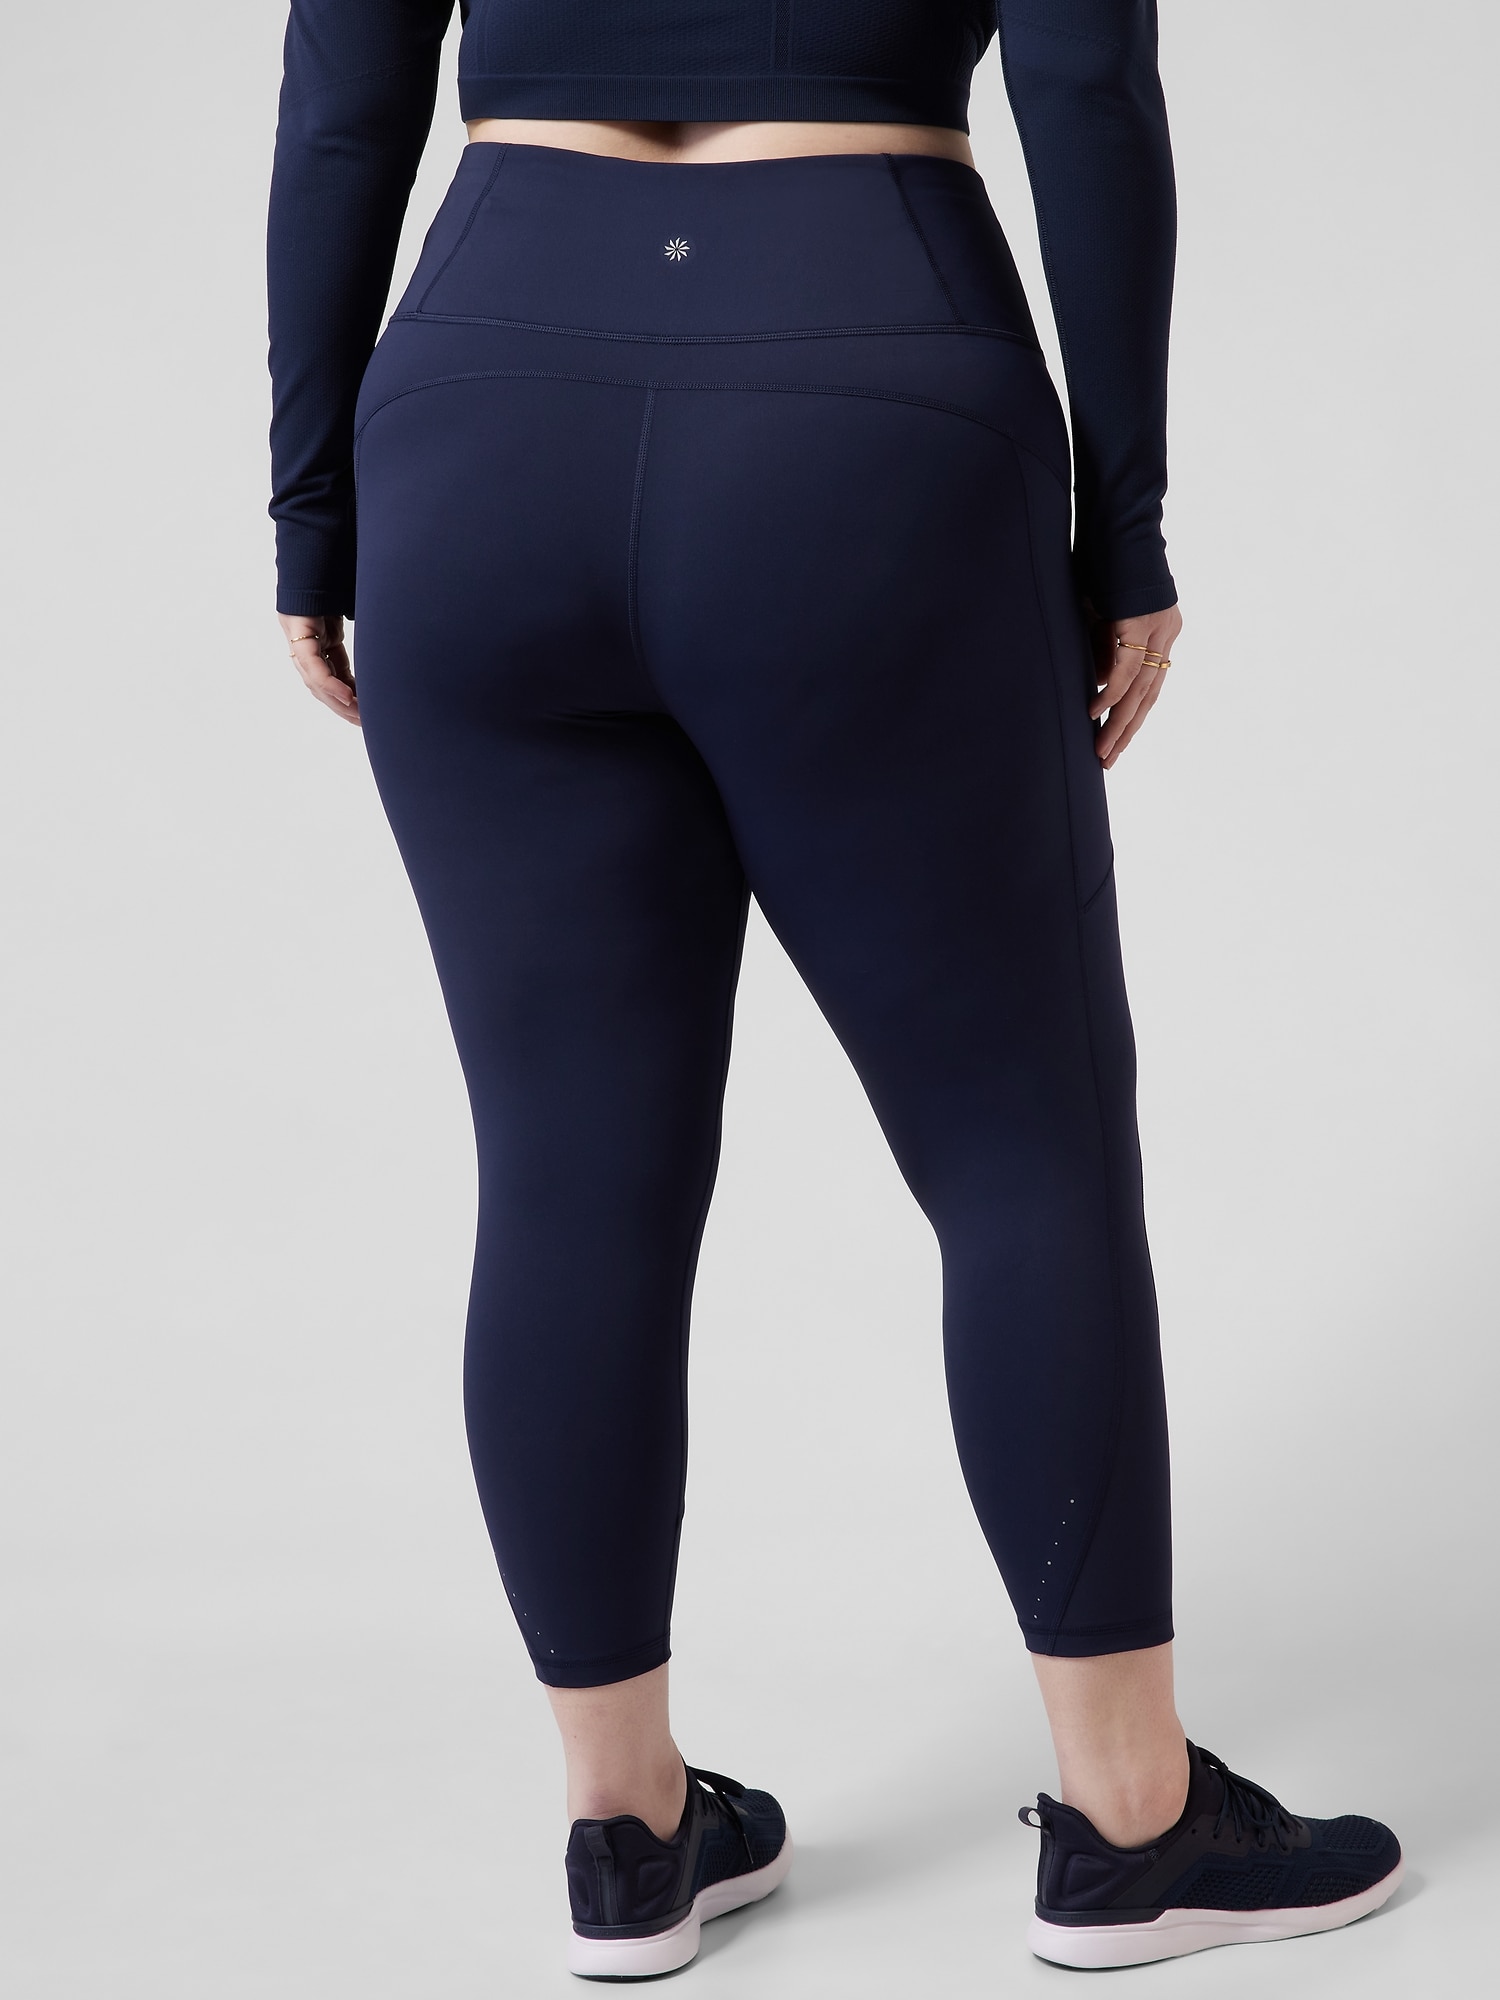 Eclipse 7/8 Tight by Athleta - Proud Mary